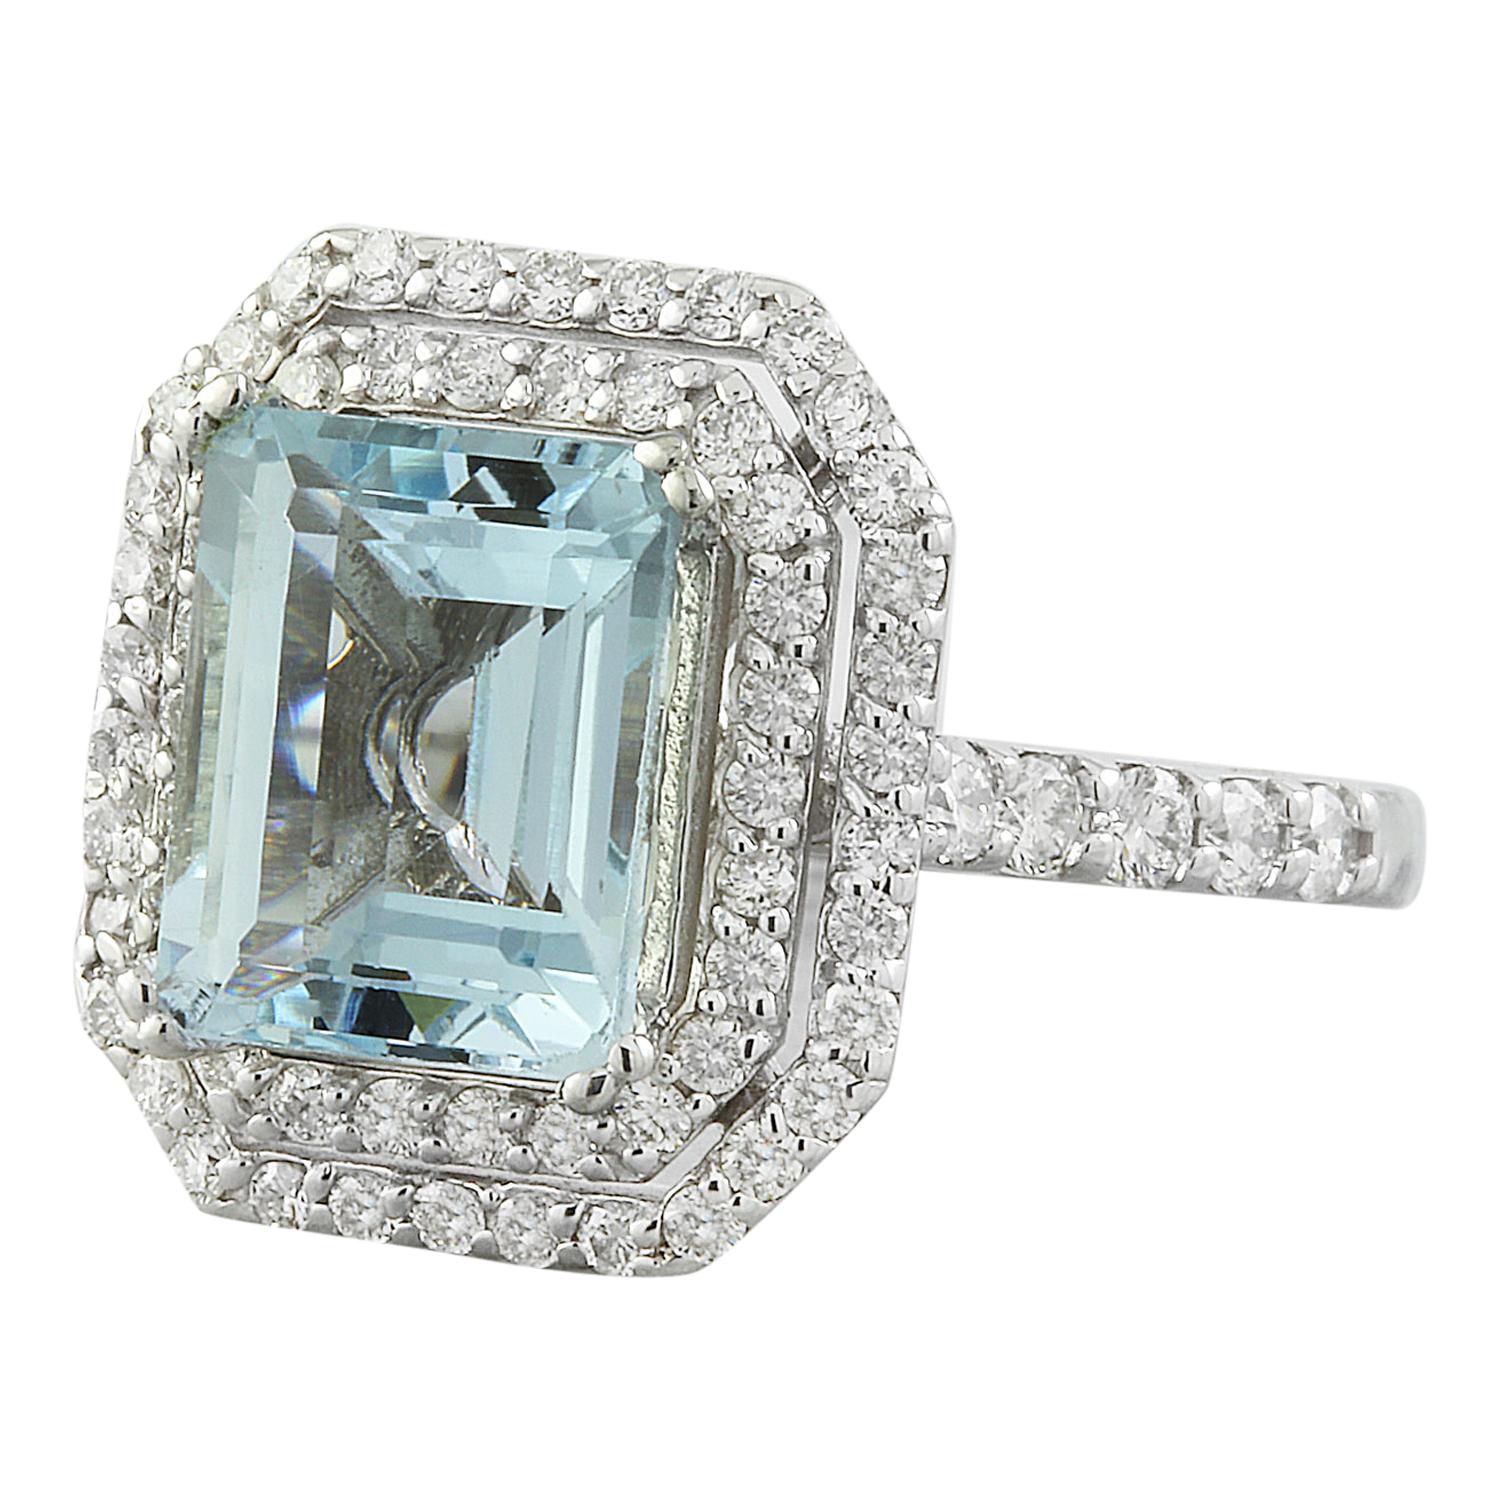 Introducing our exquisite 4.35 Carat Aquamarine 14K White Gold Diamond Ring. Crafted from stamped 14K White Gold, this ring has a total weight of 6.1 grams, ensuring both quality and durability. The focal point is a captivating aquamarine gemstone